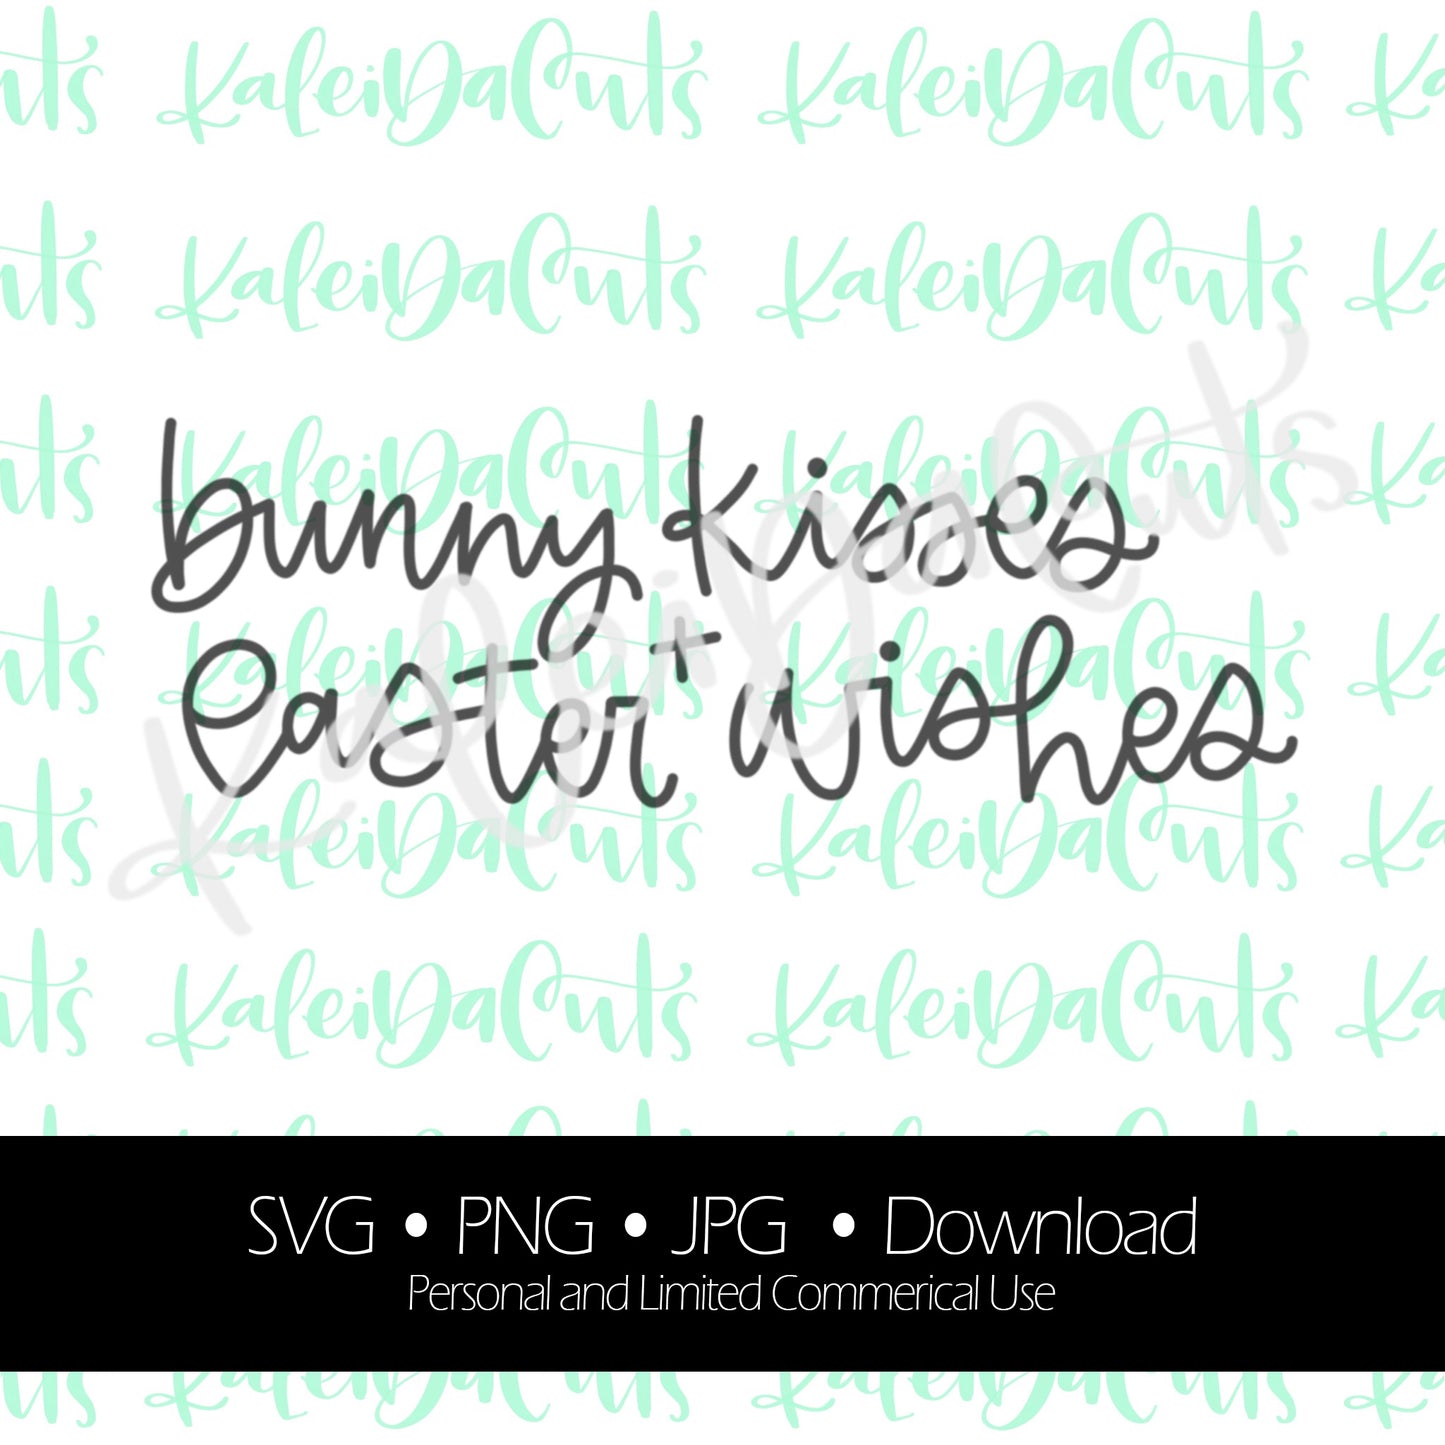 Bunny Kisses and Easter Wishes Digital Download.